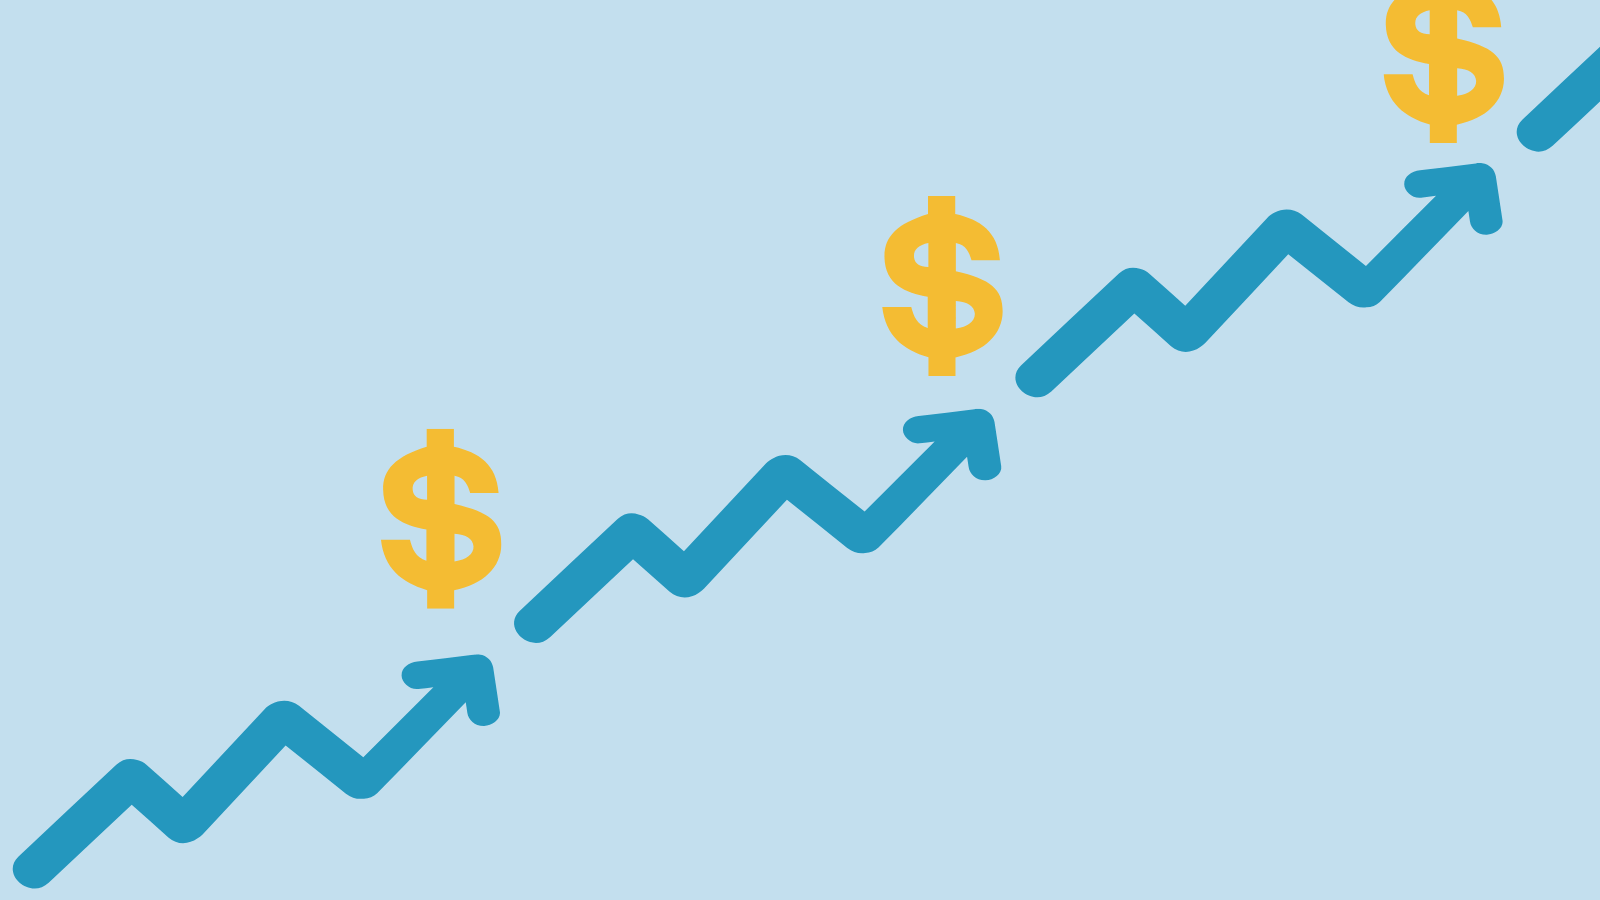 Upward Trending line graph with dollar signs